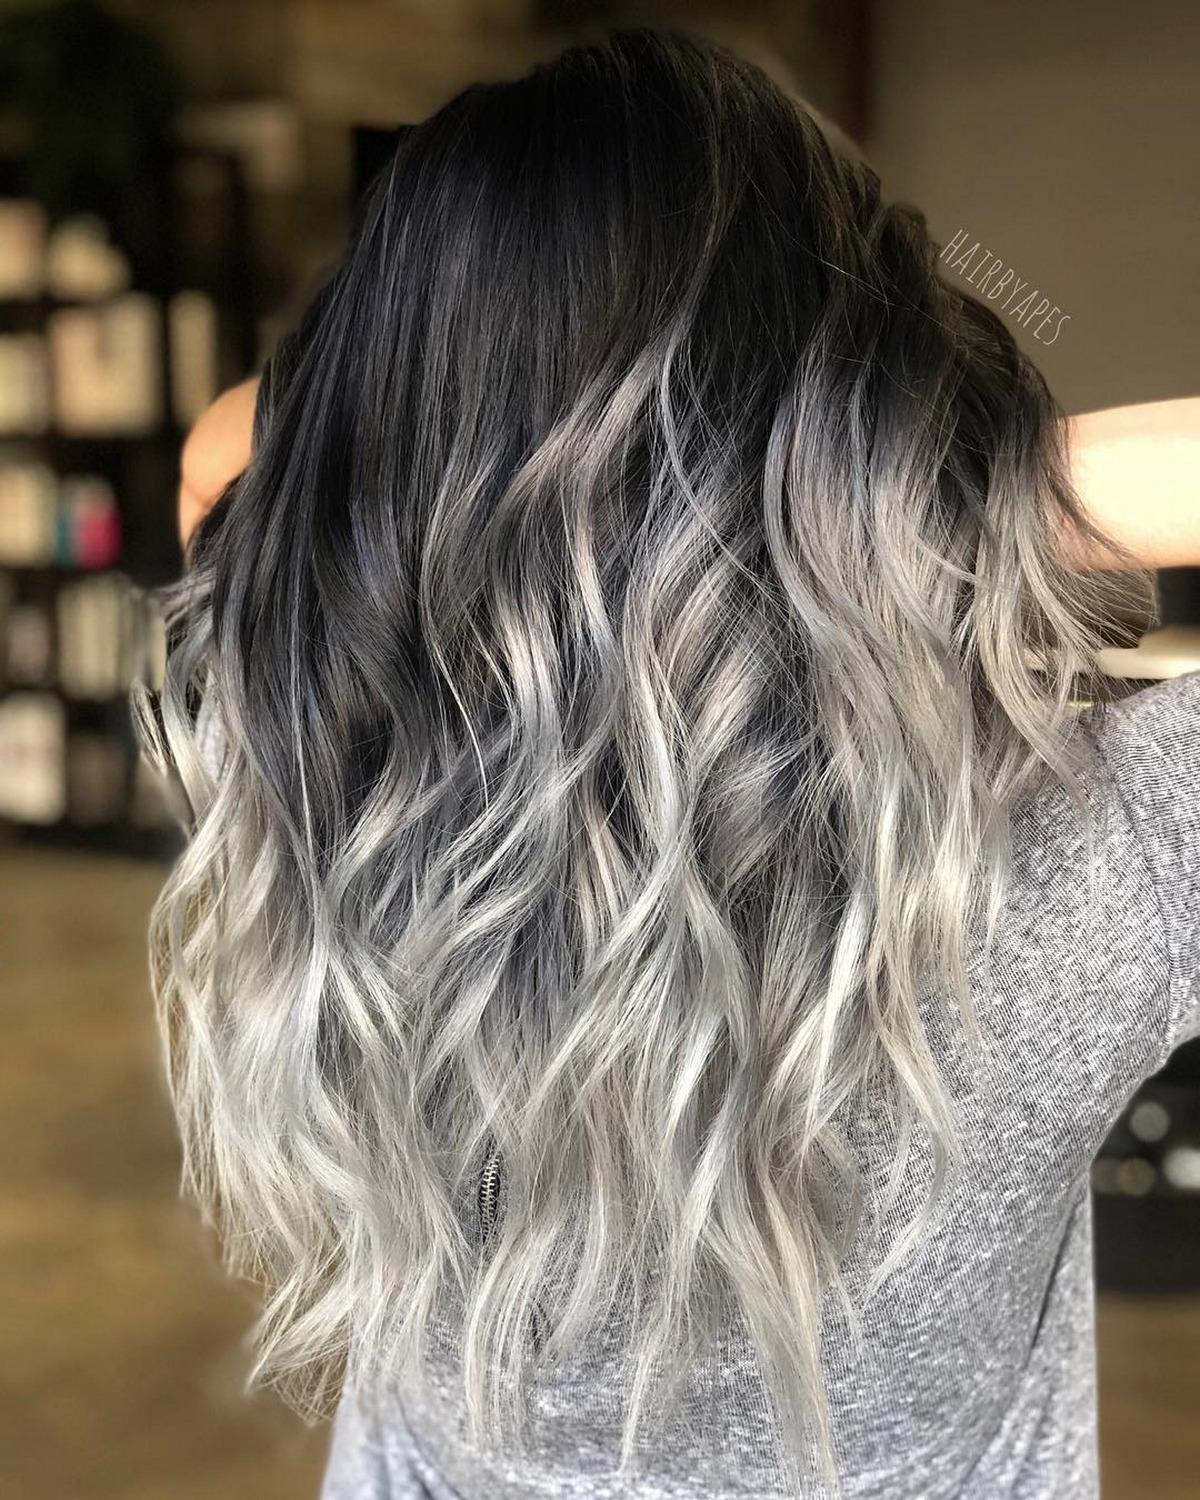 Long Layered Brunette Hair with Silver Ends